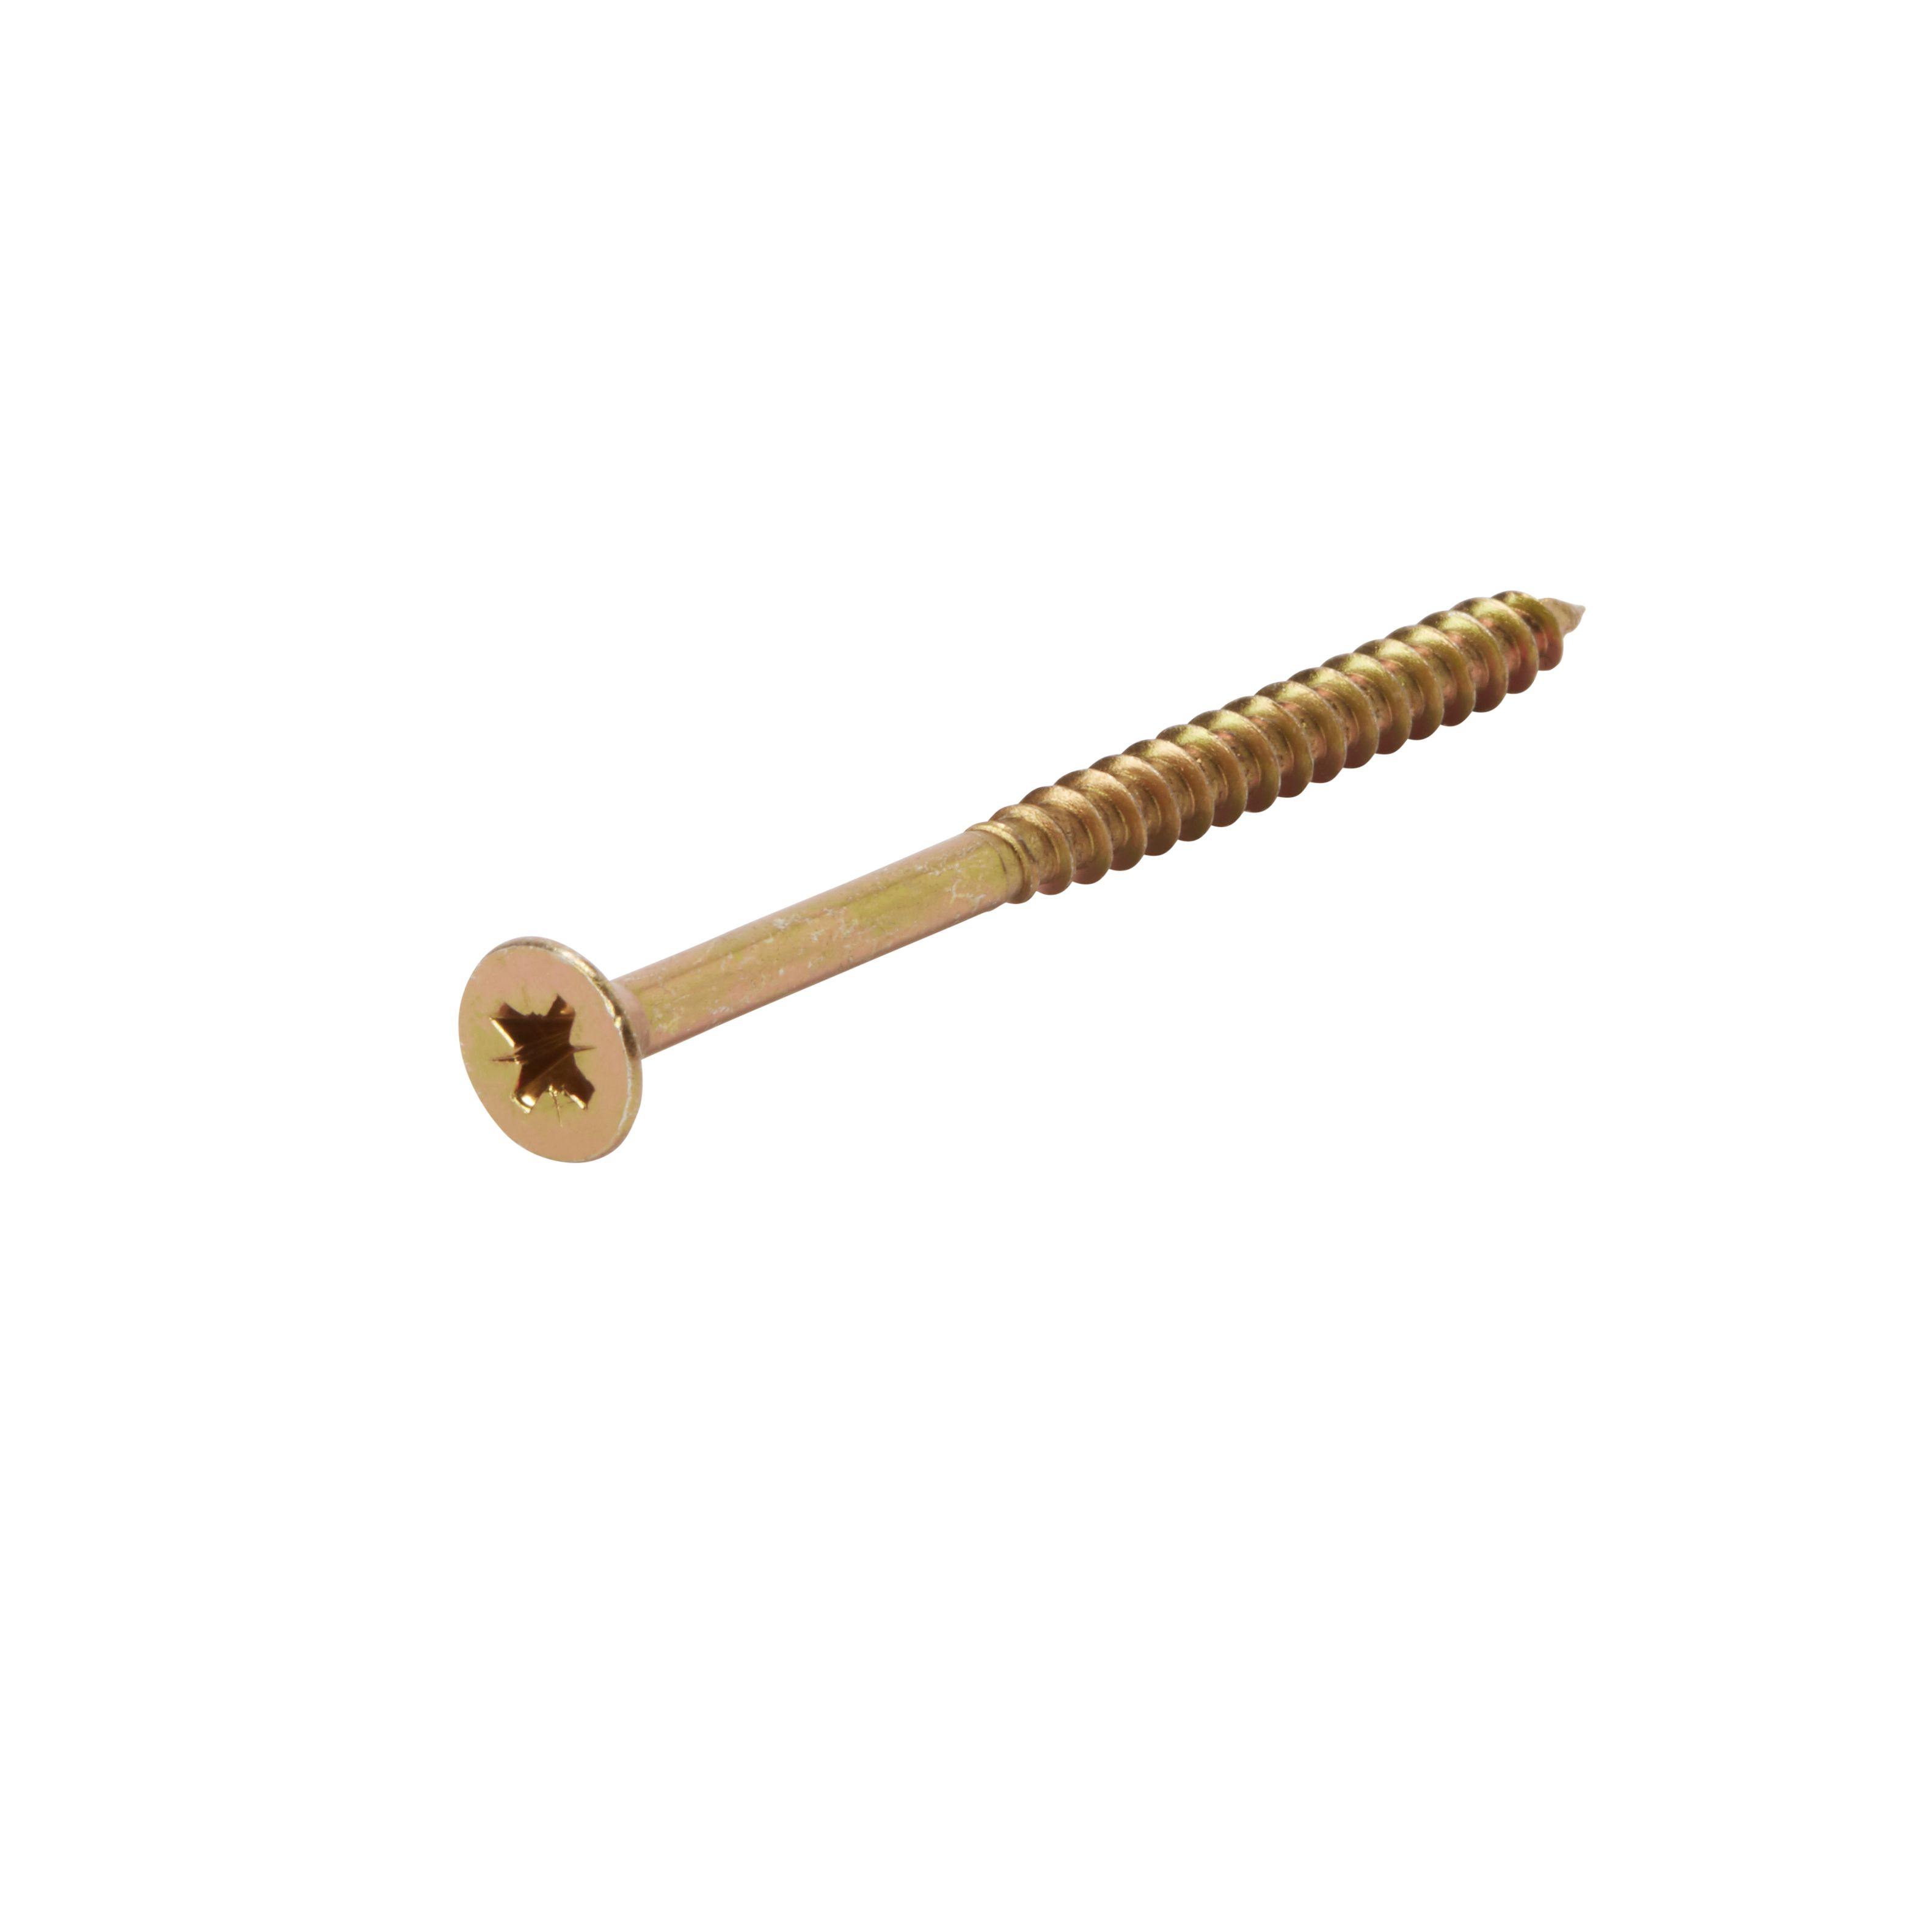 B&Q PZ Double-countersunk Zinc-plated Carbon steel (C1022) Screws trade case, Pack of 1400